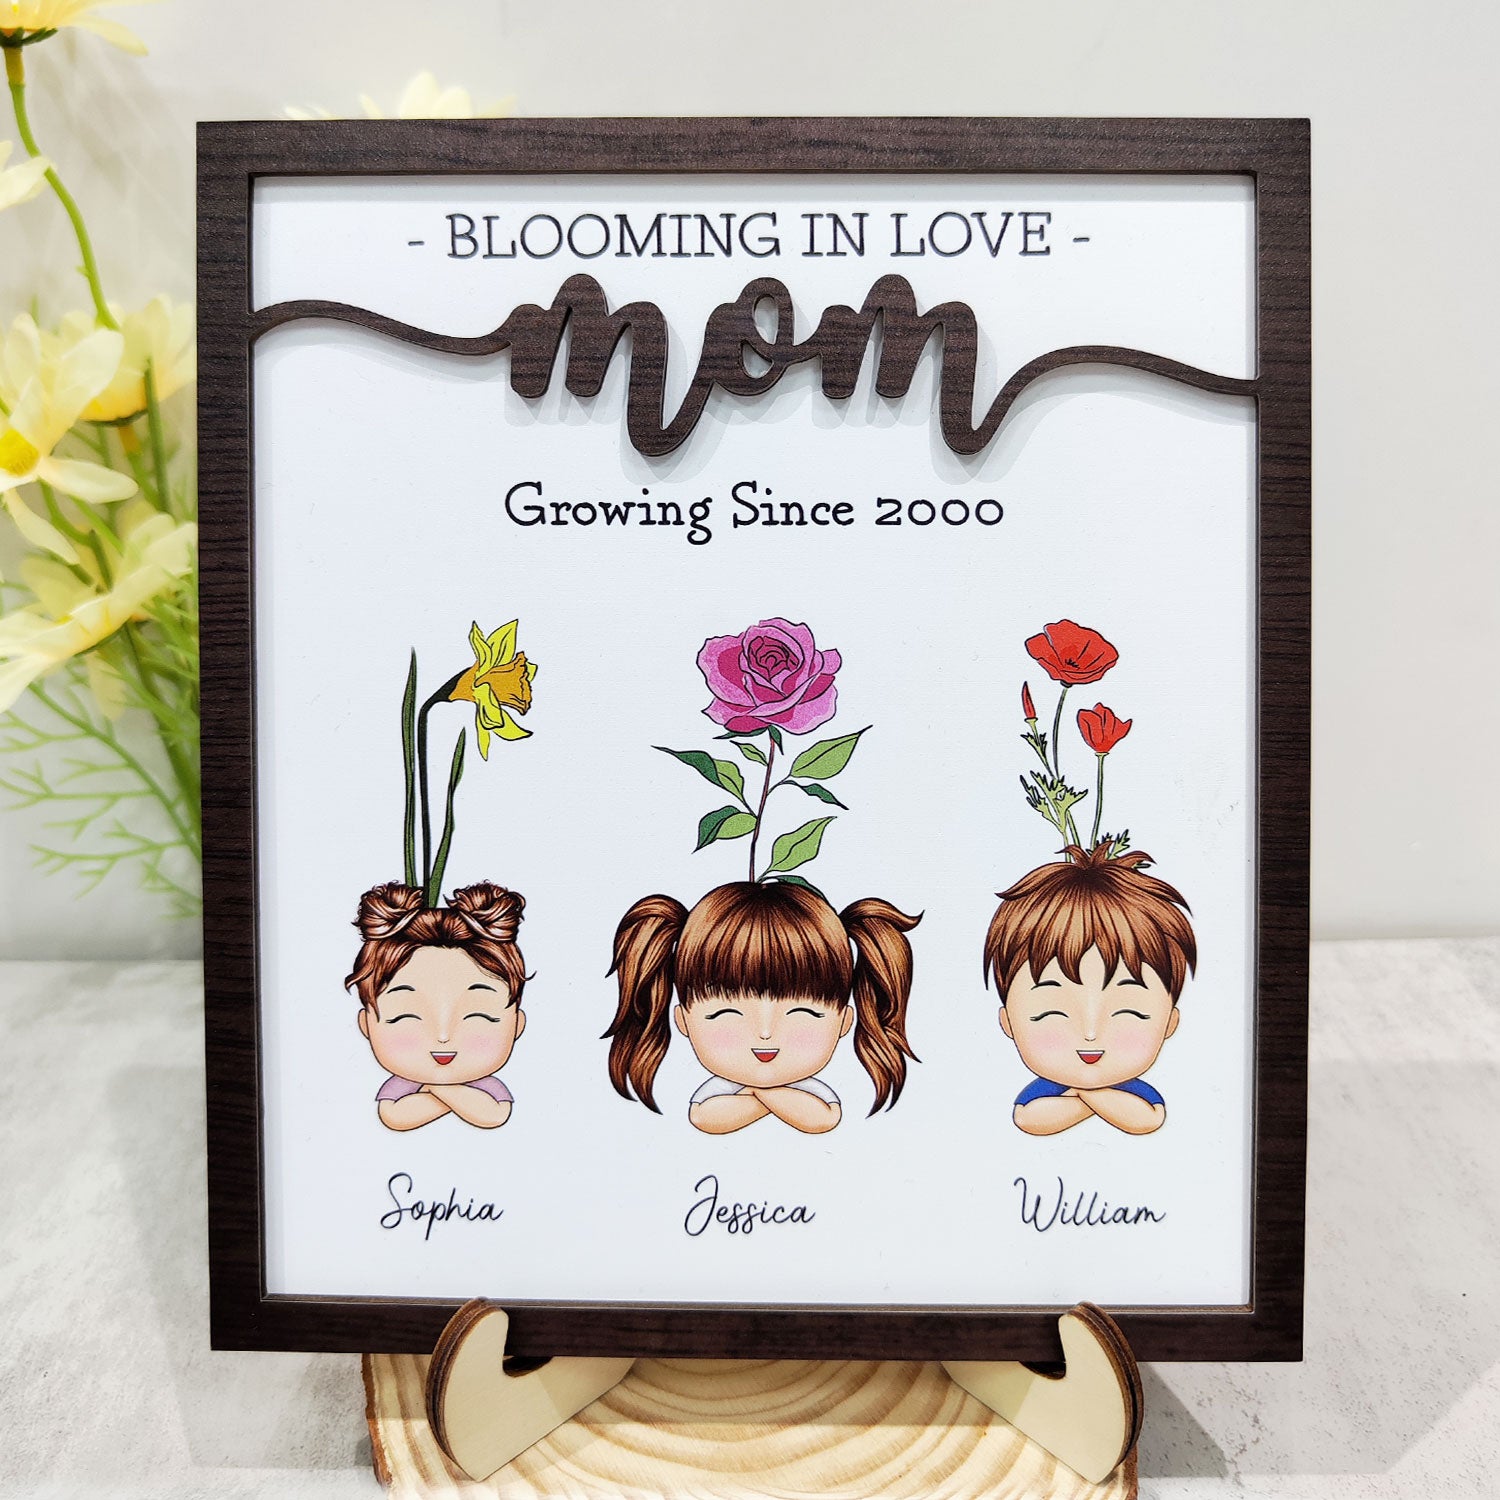 Birth Month Flowers Mom Blooming In Love - Gift For Mothers, Grandmas - Personalized 2-Layered Wooden Plaque With Stand